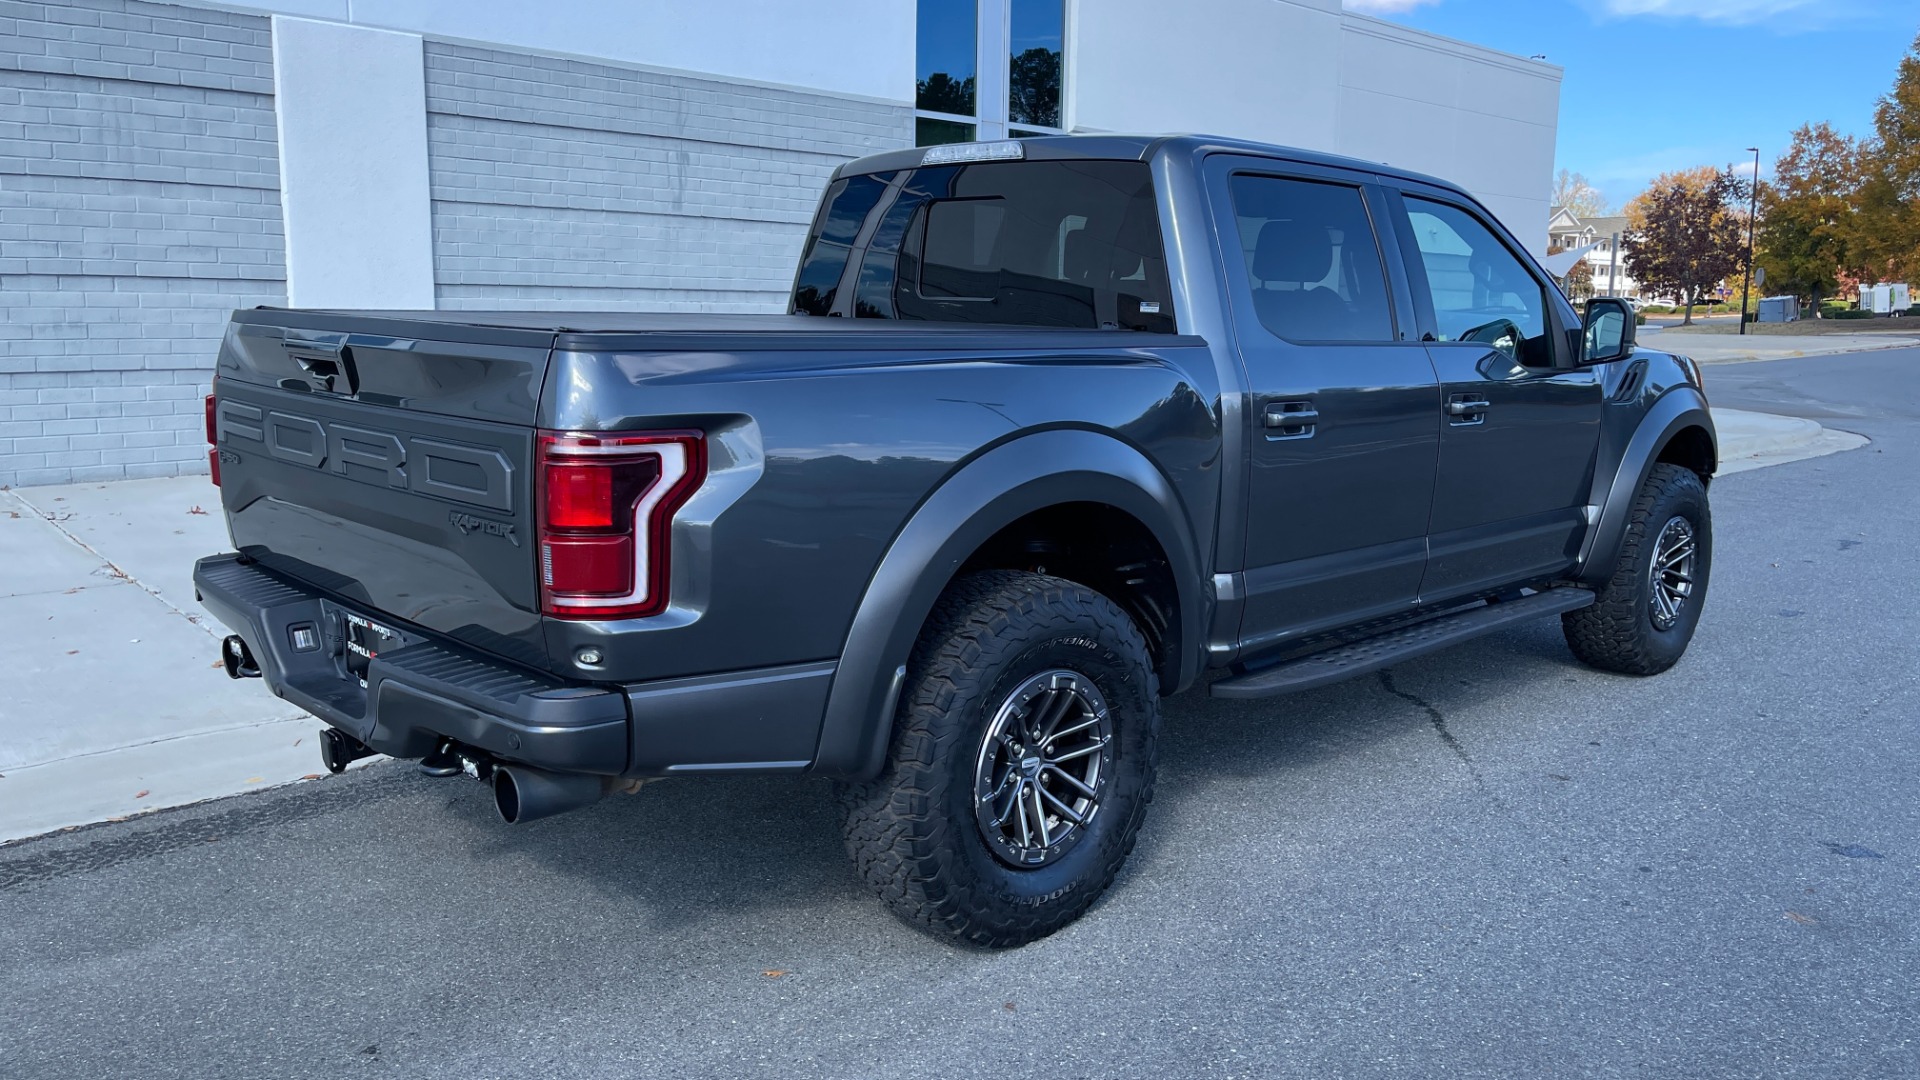 Used 2019 Ford F-150 RAPTOR / 802A PACKAGE / LIGHT PODS / CARBON FIBER / PANORAMIC ROOF for sale Sold at Formula Imports in Charlotte NC 28227 7